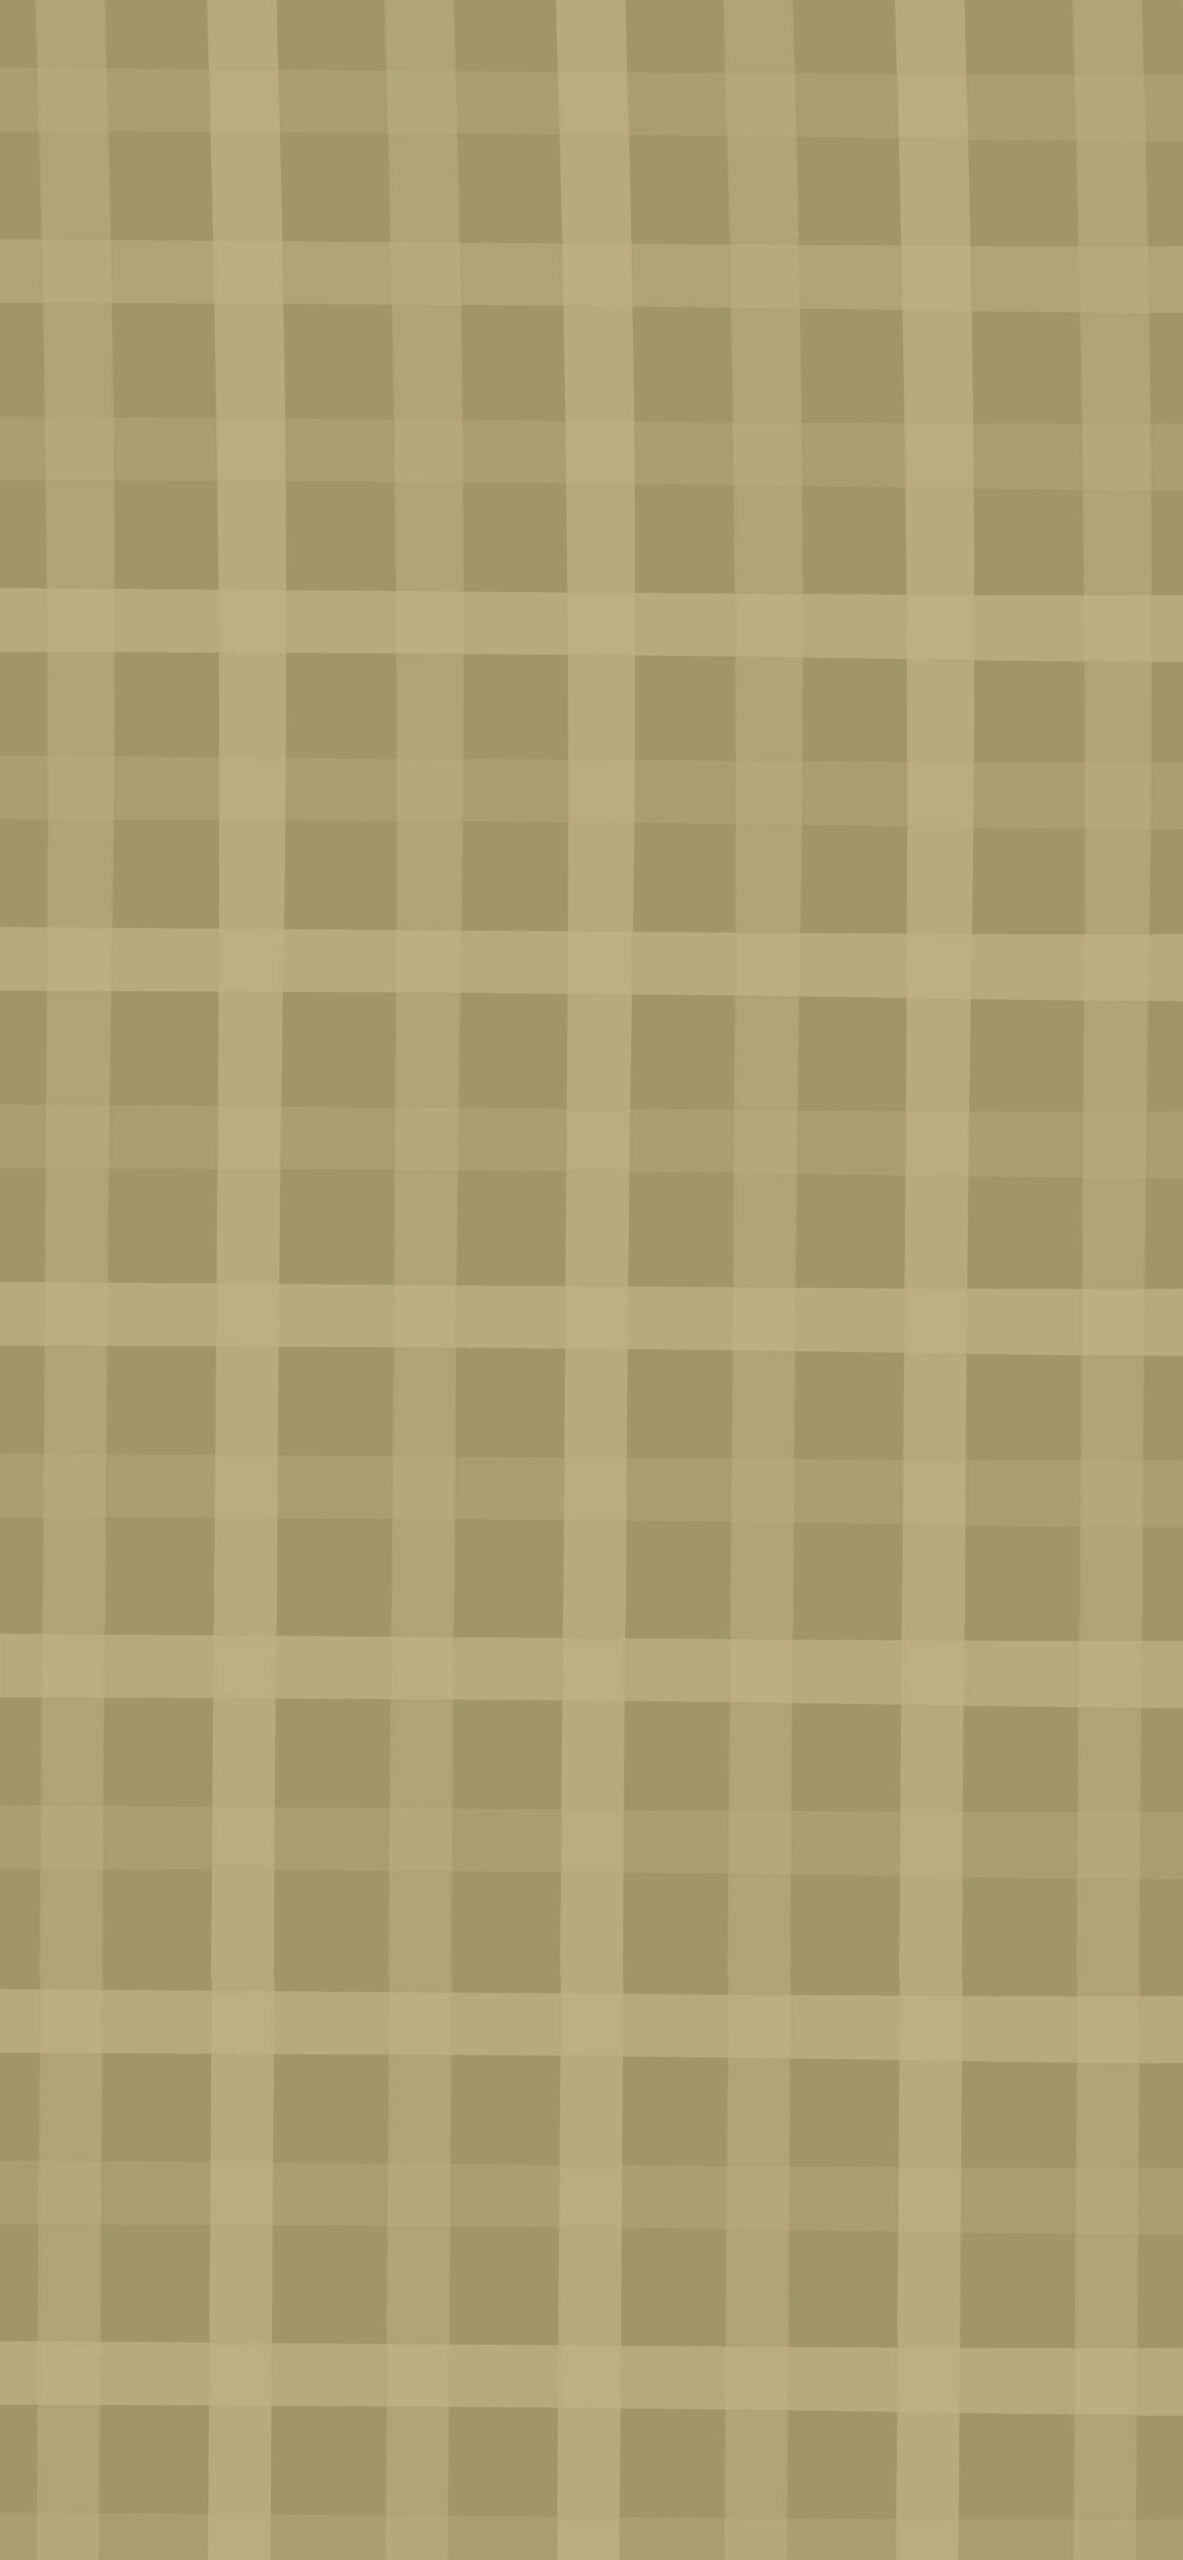 A tan and white checkered pattern - Cottagecore, checkered